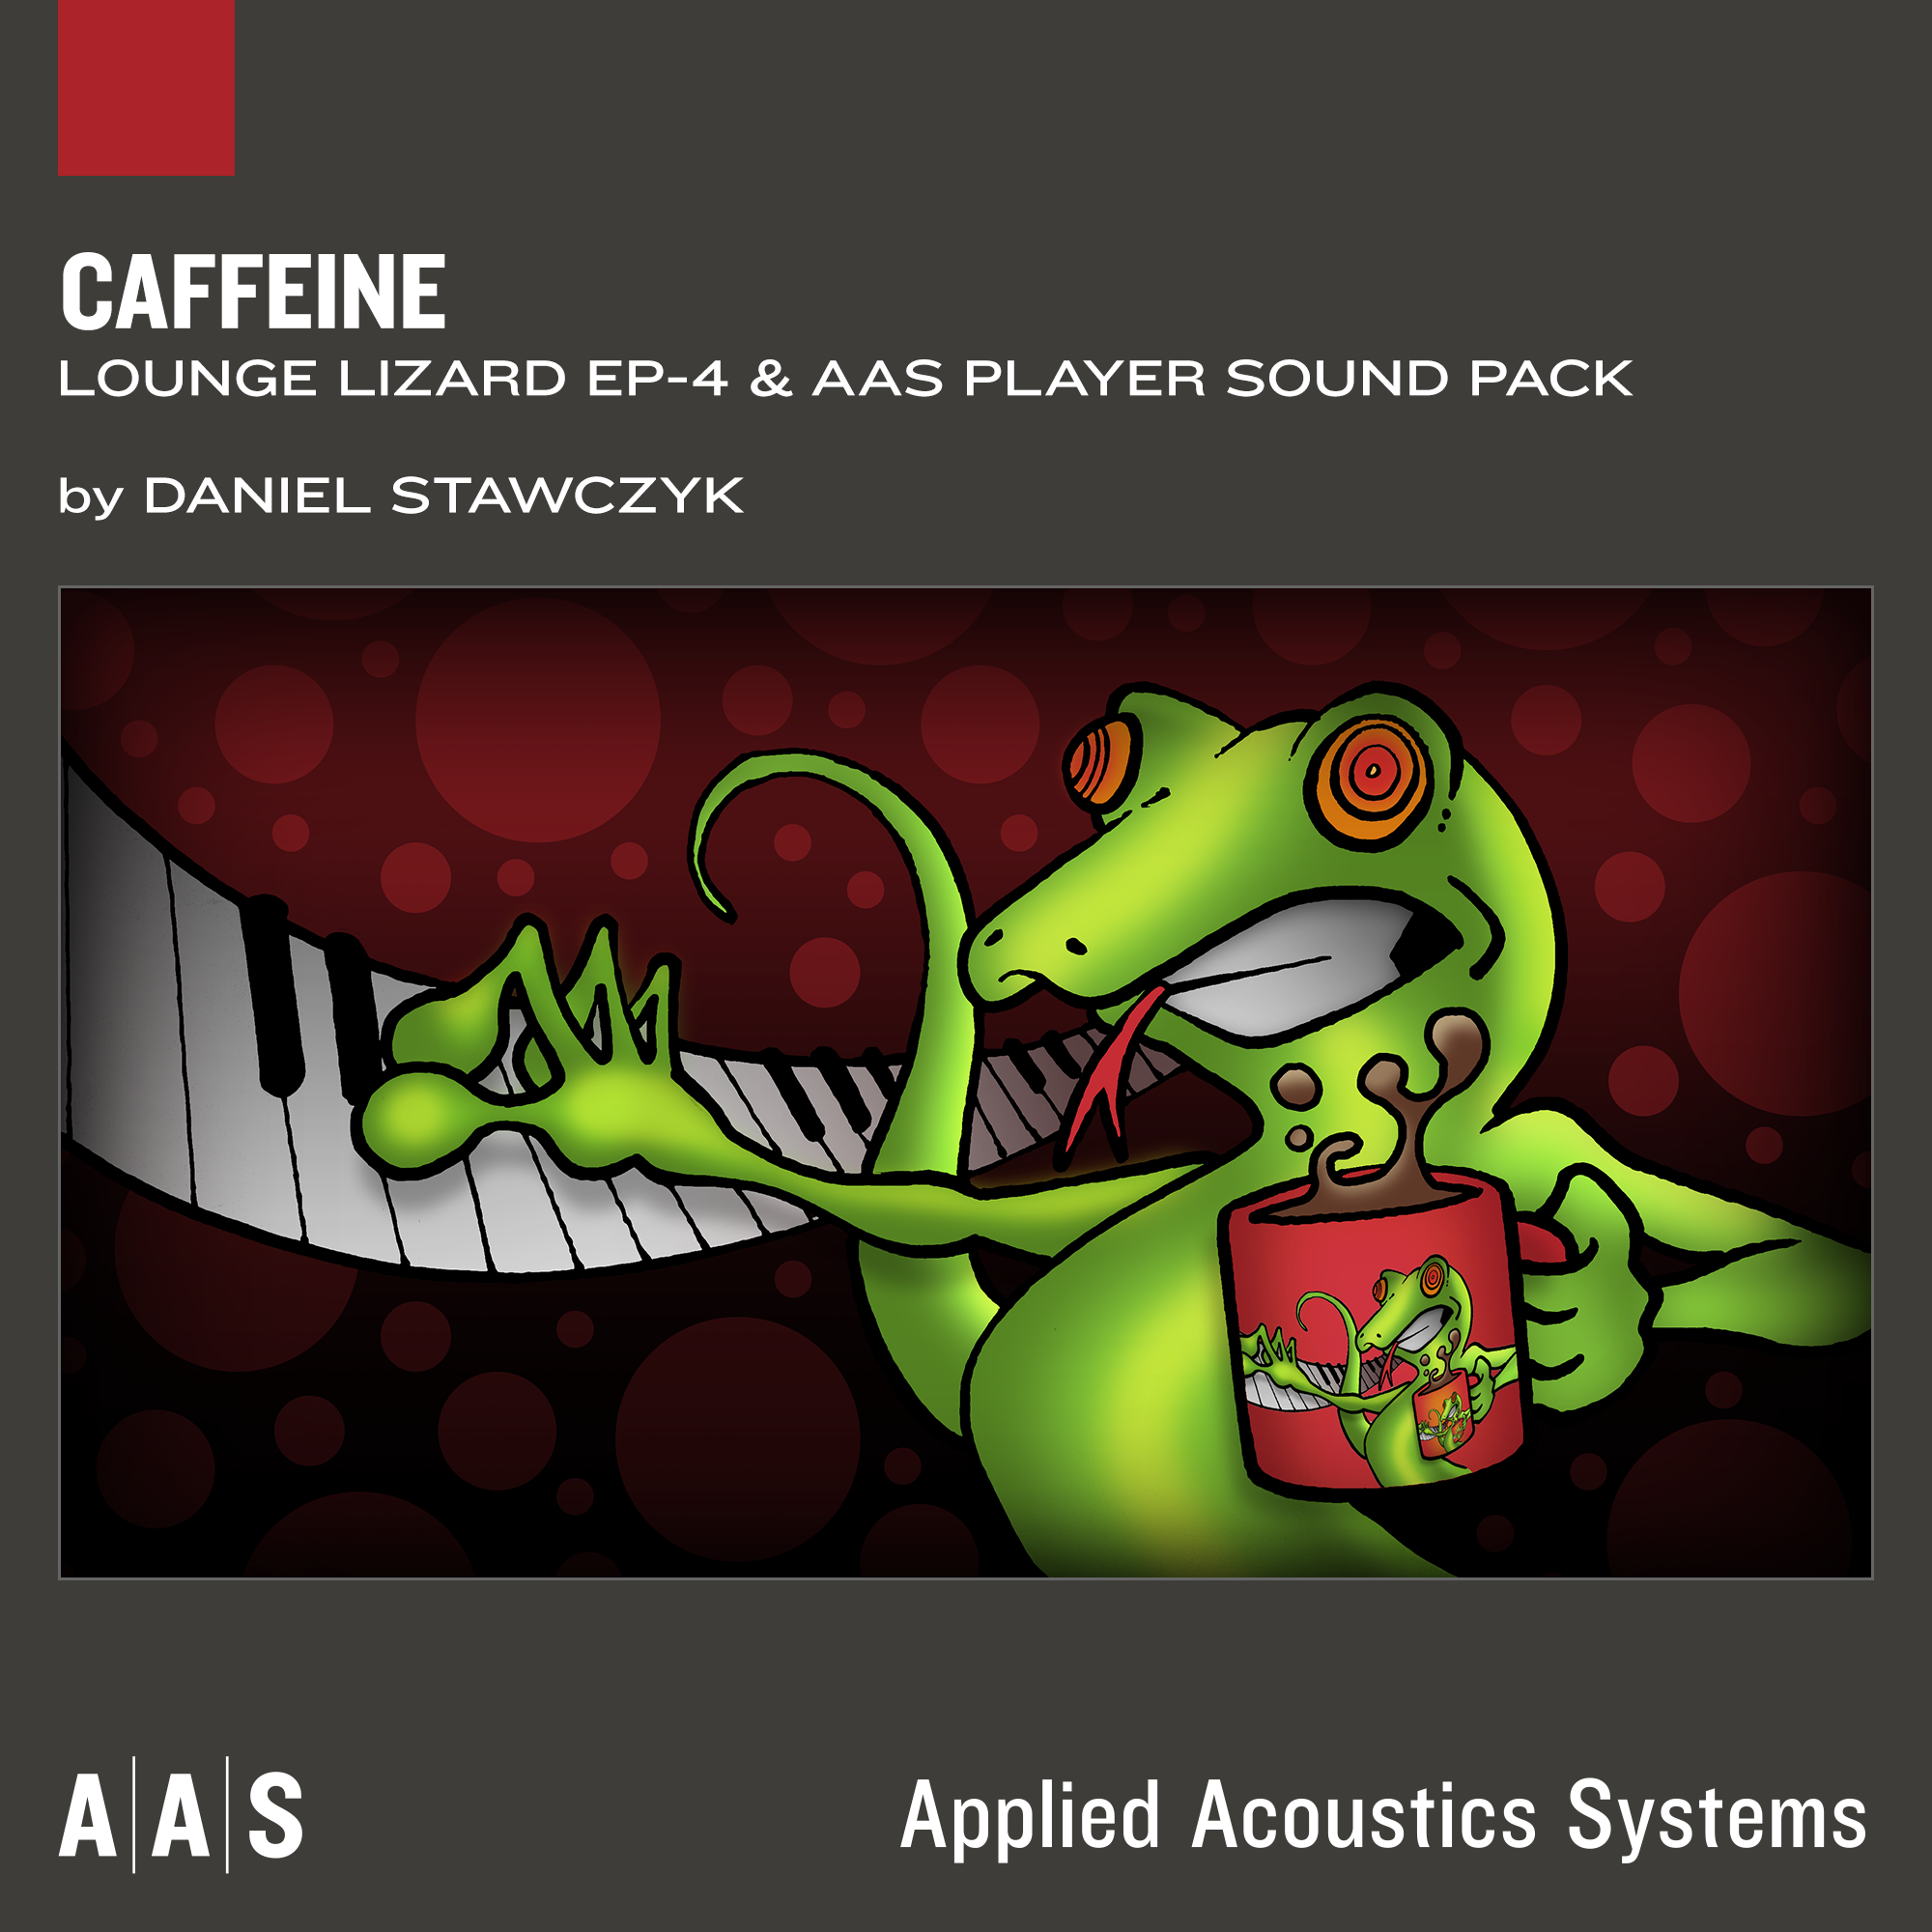 Lounge Lizard and AAS Player sound pack ： Caffeine